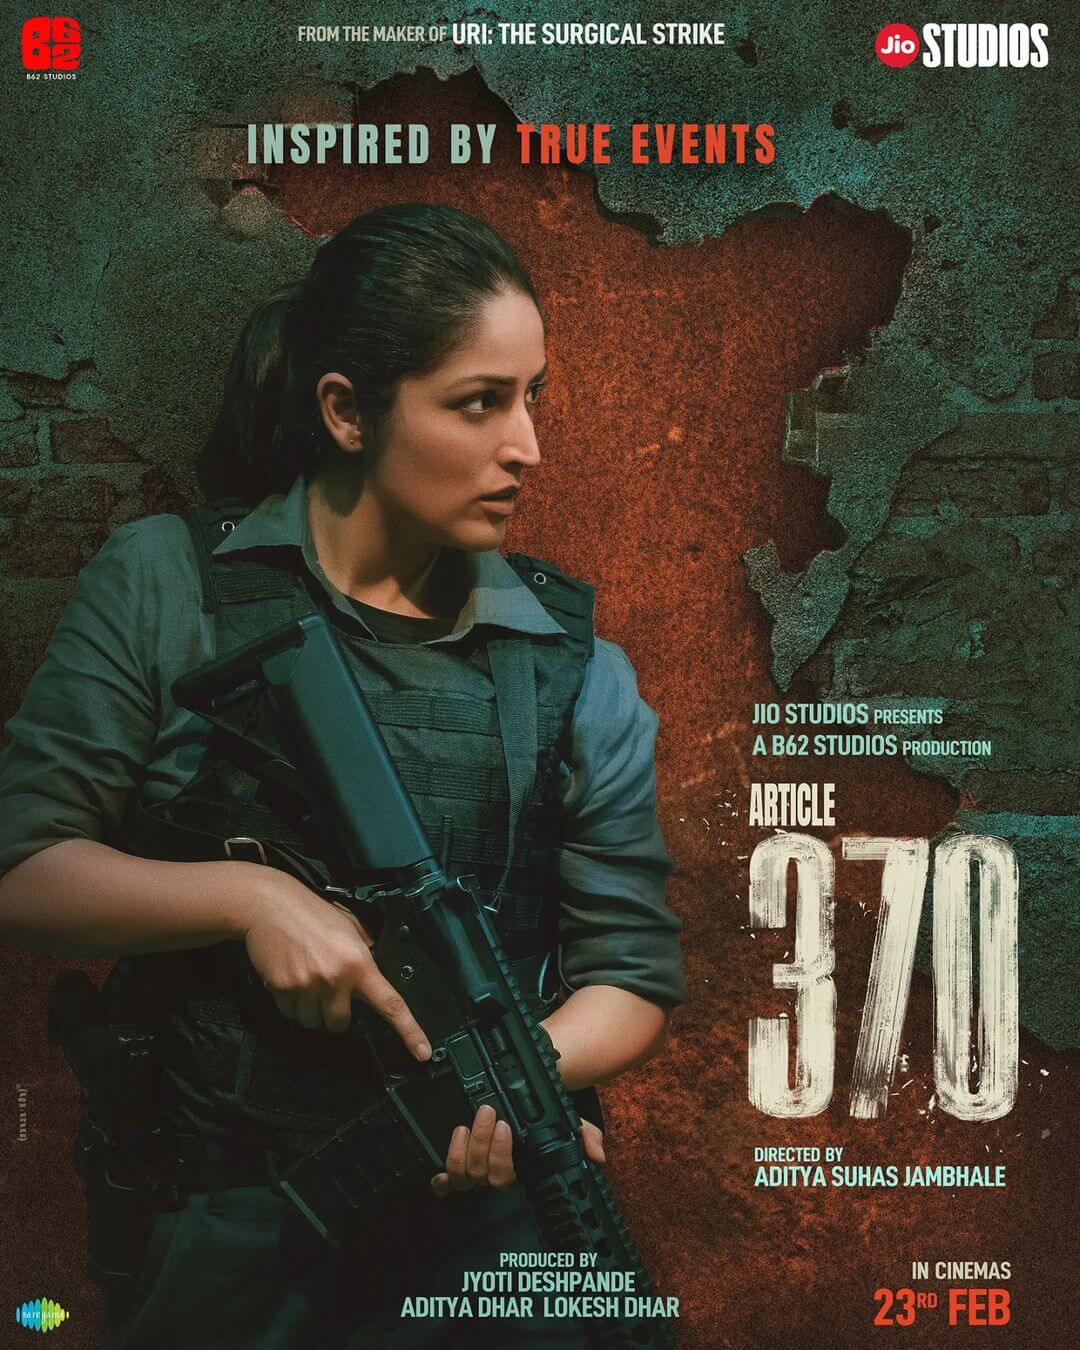 Article 370 Movie Poster